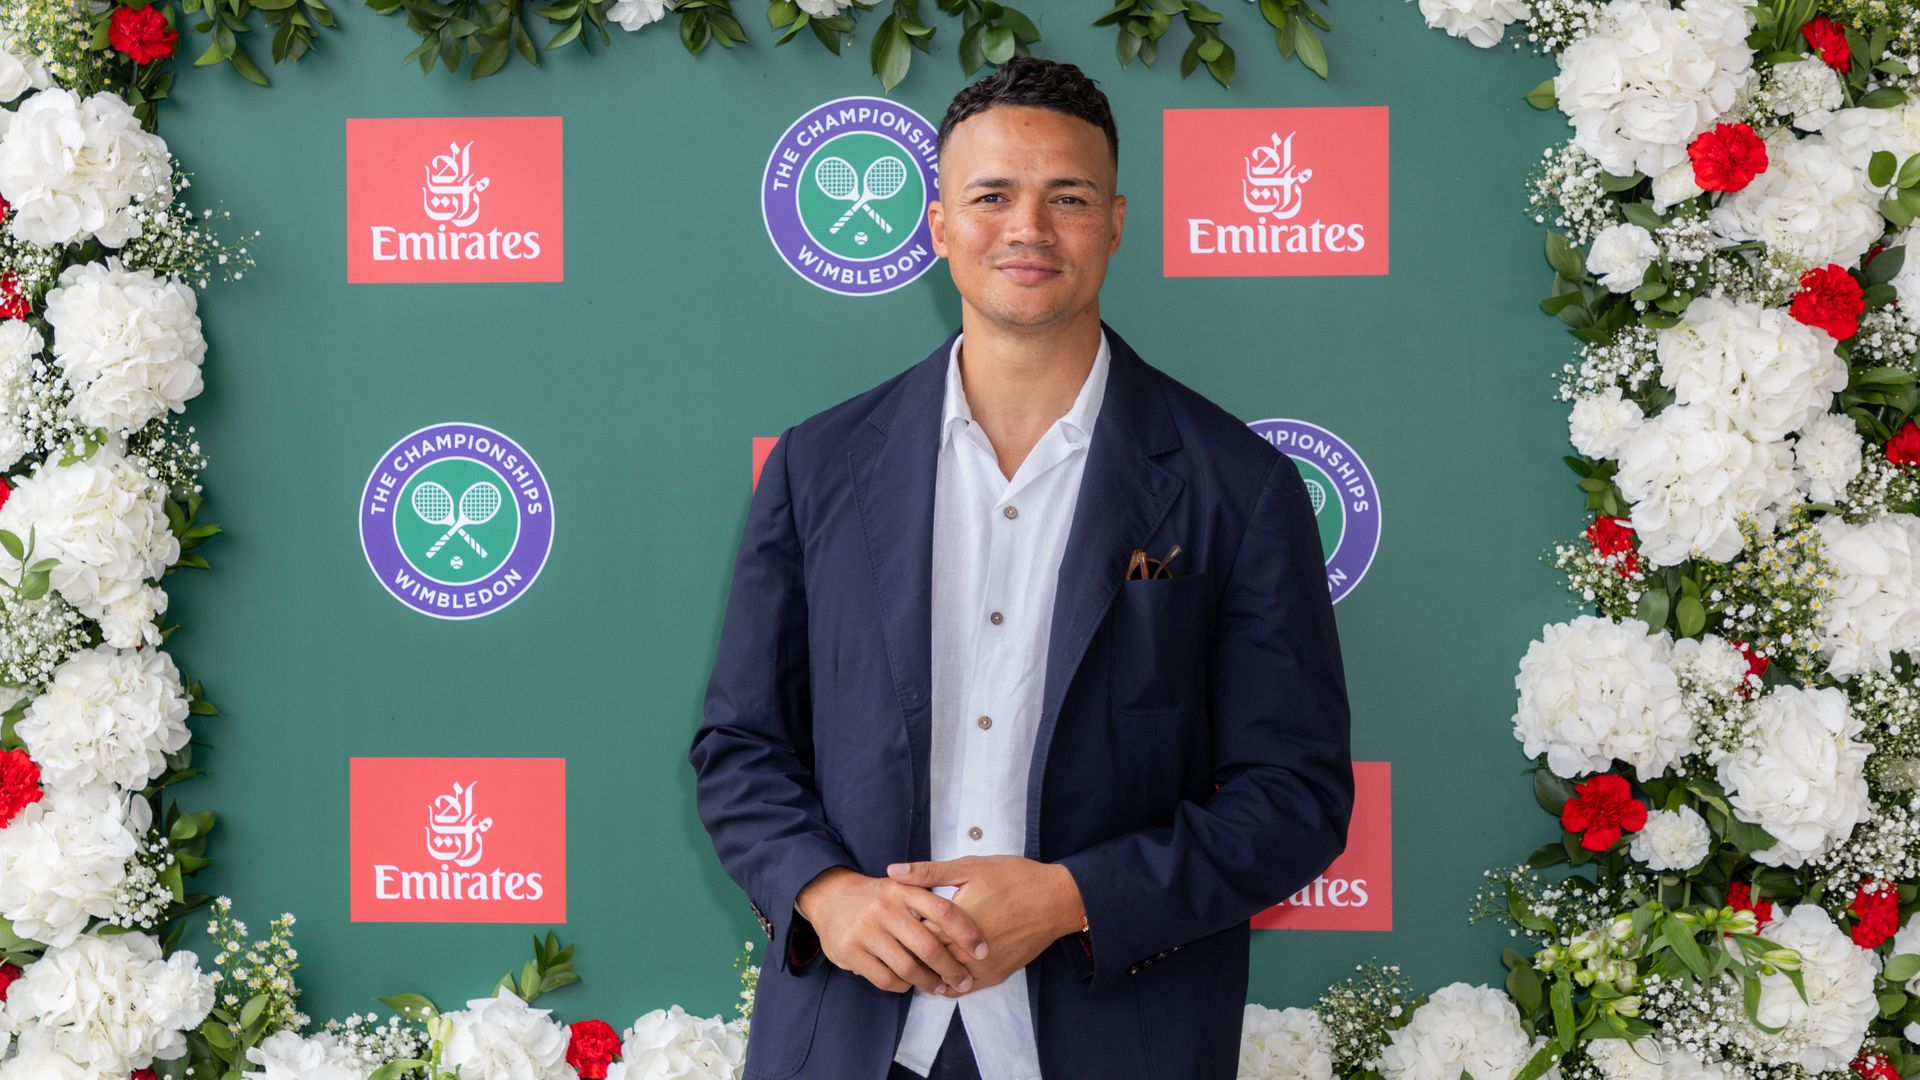 Jermaine Jenas in front of a green background